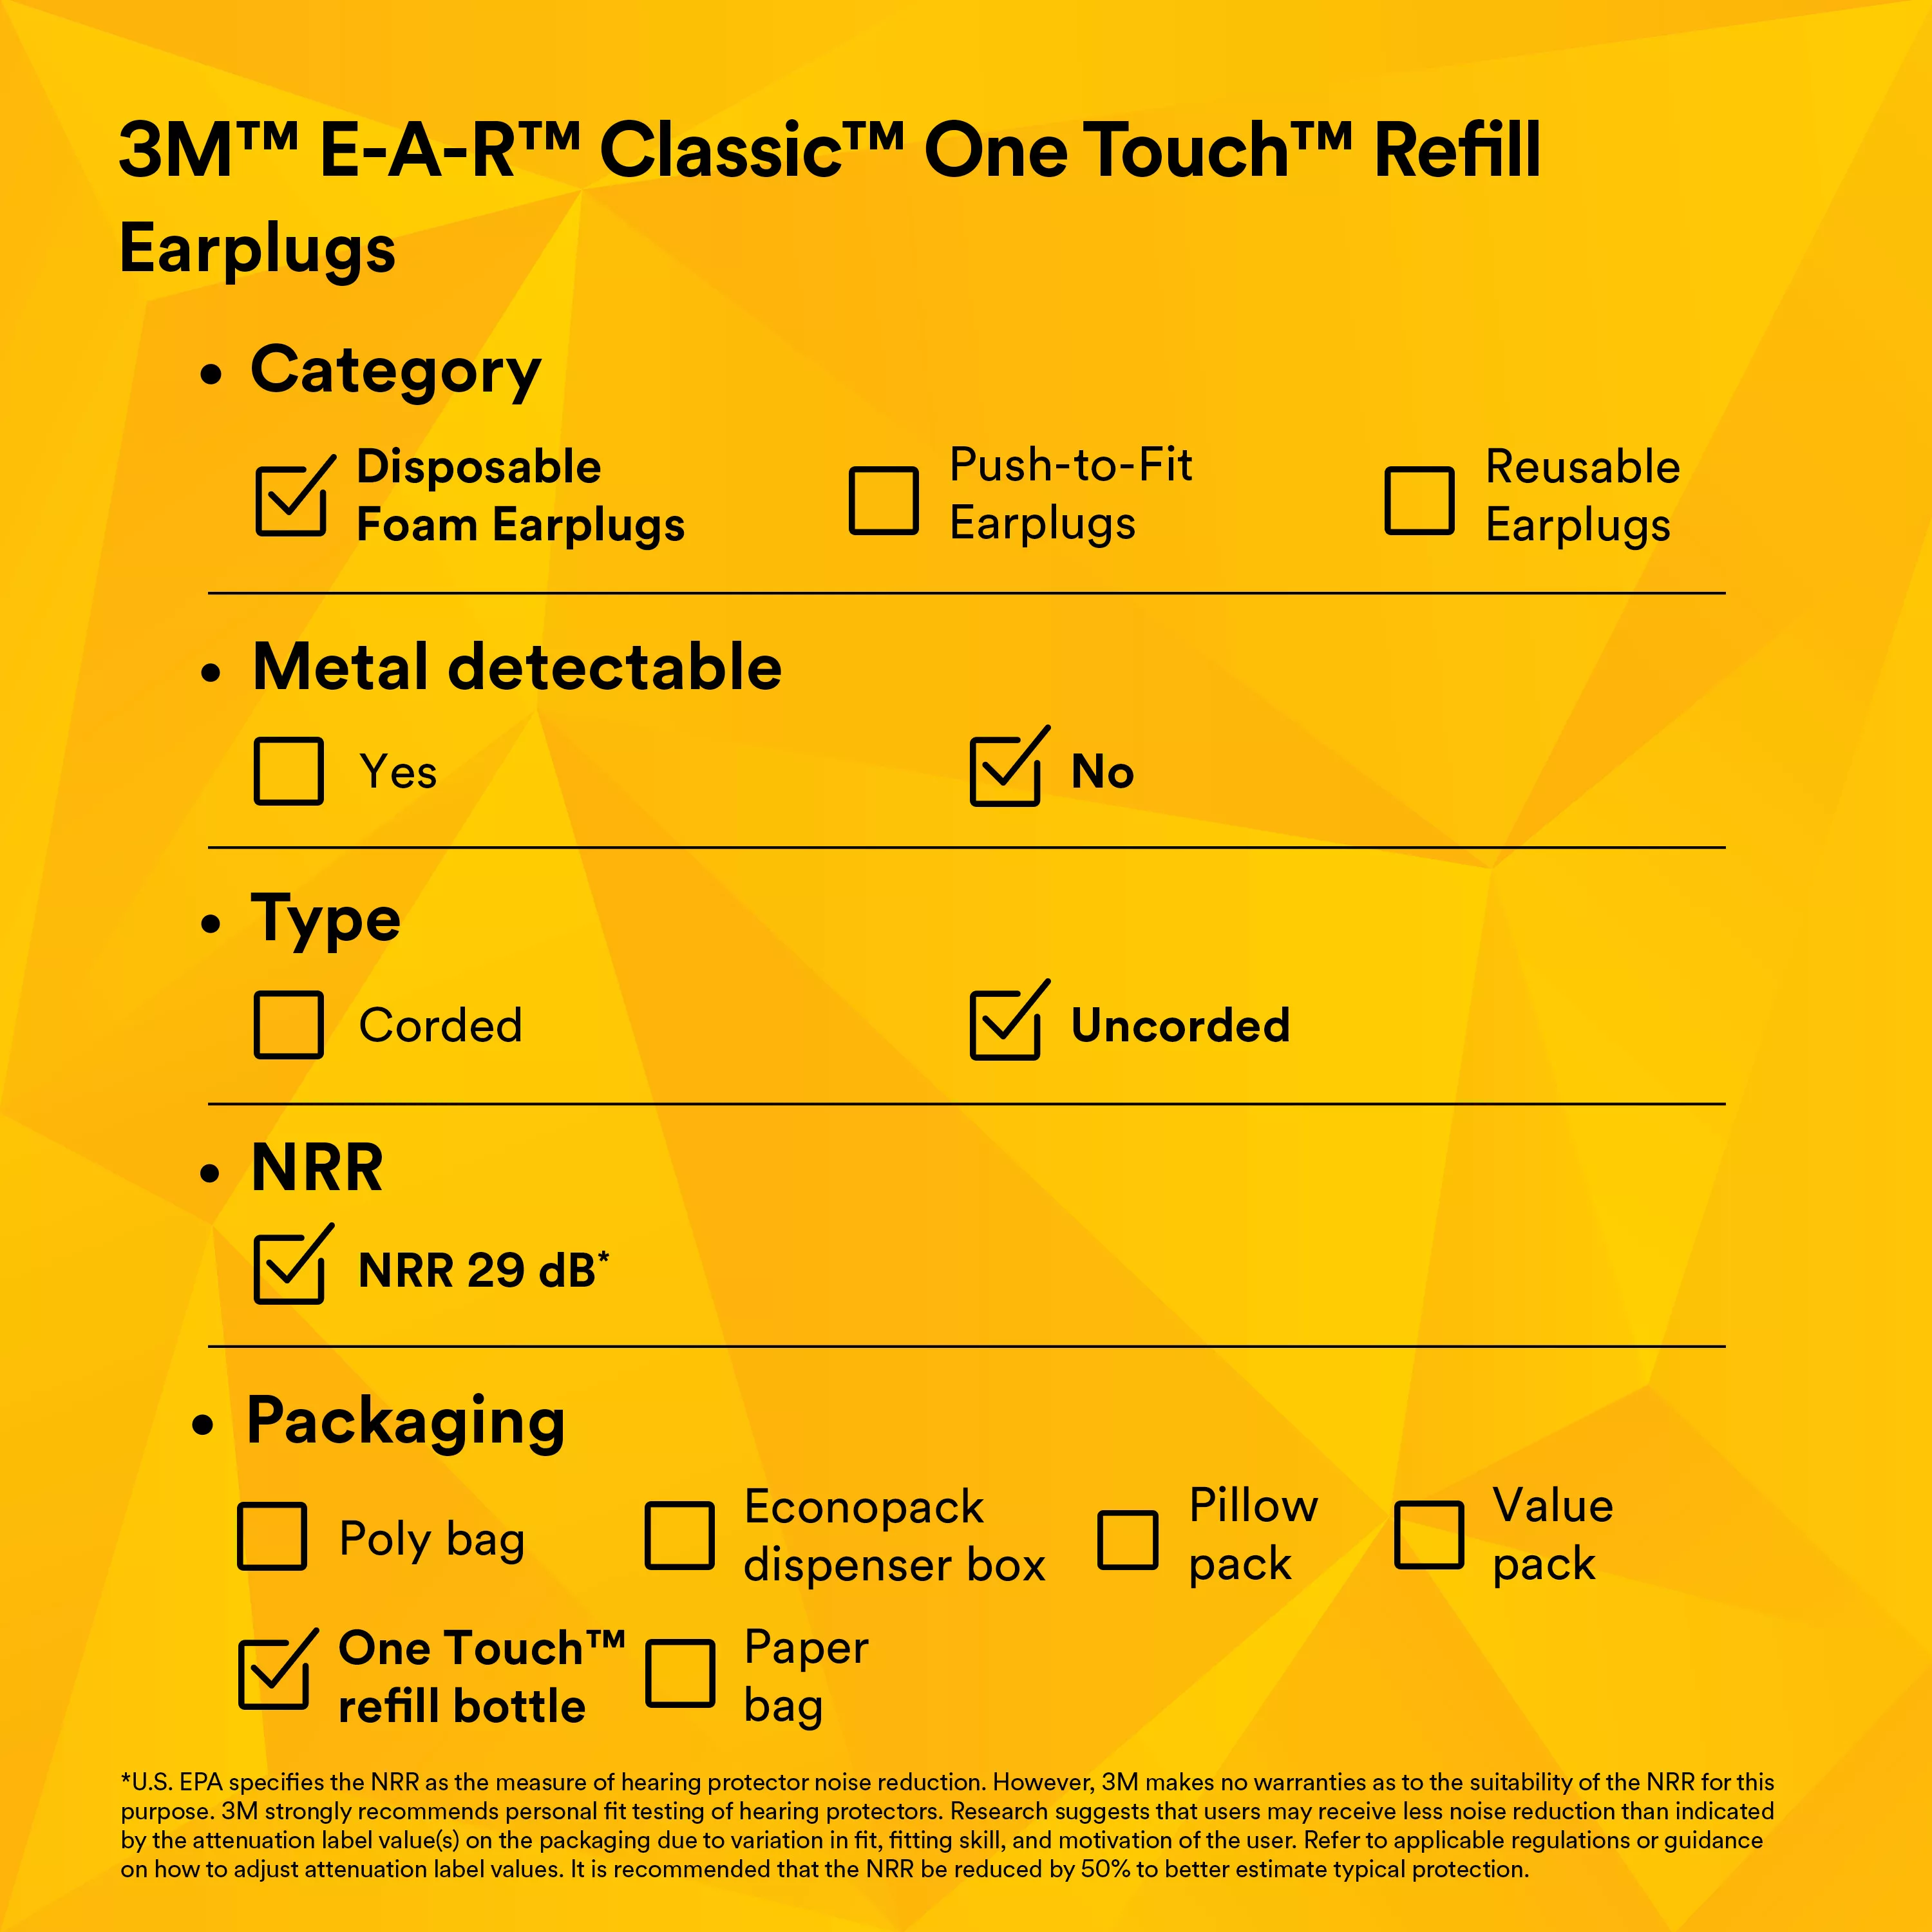 SKU 7000002298 | 3M™ E-A-R™ Classic™ One Touch™ Refill 391-1001